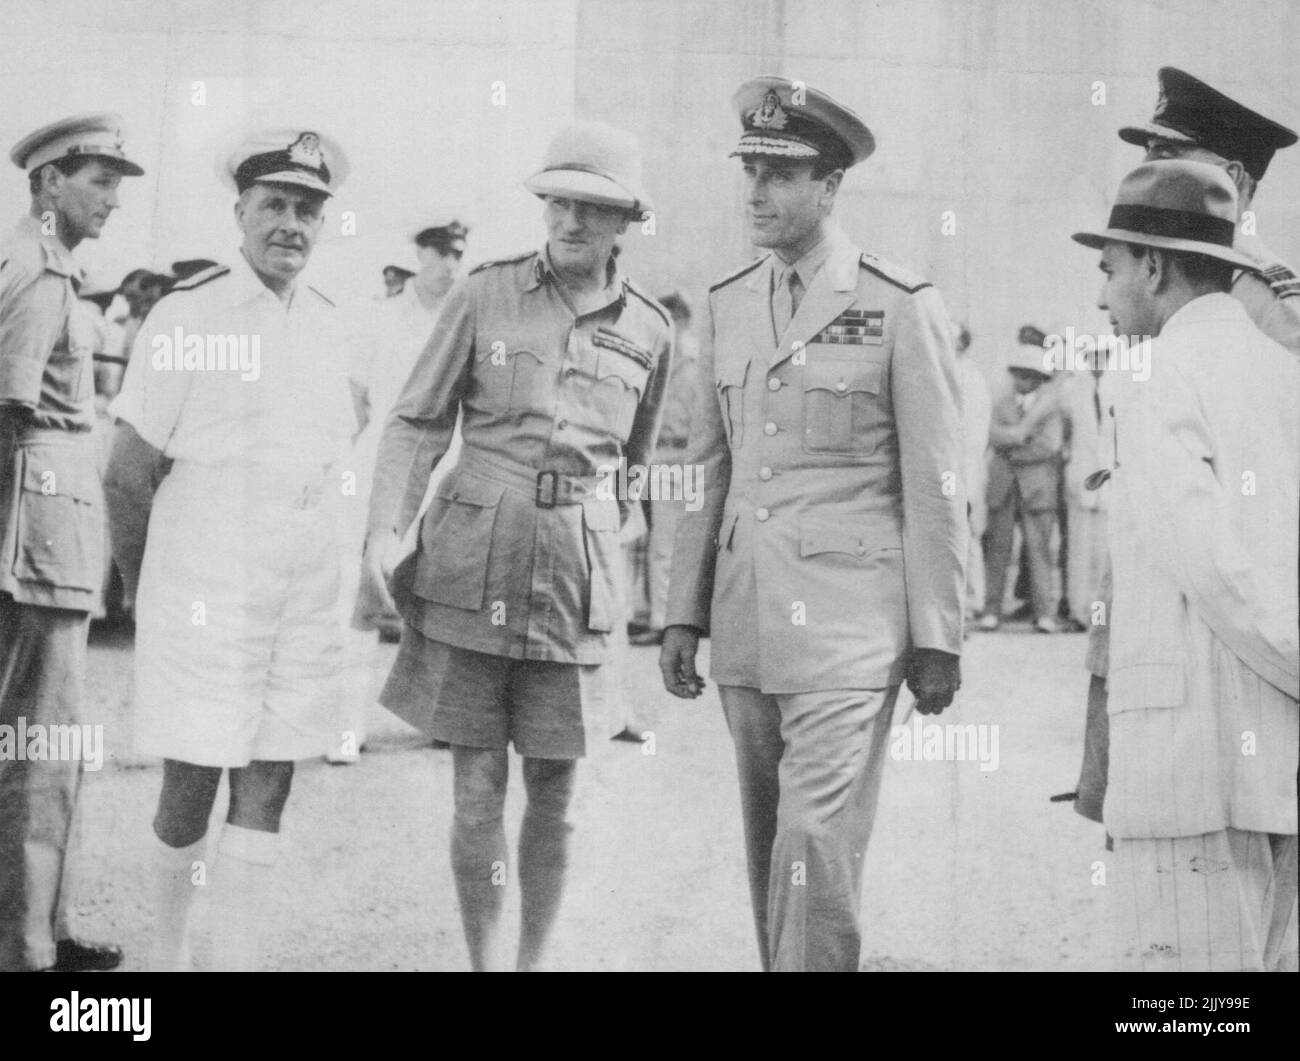 mand, with British Military and civil officials who were among the Allied Commanders who greeted him on his arrival in New Delhi, India, seat of his headquarters for the first time since assuming his new command. Left to right: Admiral Sir James Sommerville, Commander-in-Chief, Eastern Fleet; General Sir Claude Auchinleck, Commander-in-Chief, India; Lord Mountbatten; Mr. C.M. Trivedi, Secretary, War Department; and air Chief Marshal Sir Richard Peirse, air officer Commanding-in-Chief, The Air Force in India (Partially hidden by Mr. Trivedi). October 29, 1943. (Photo by Associated Press Photo). Stock Photo